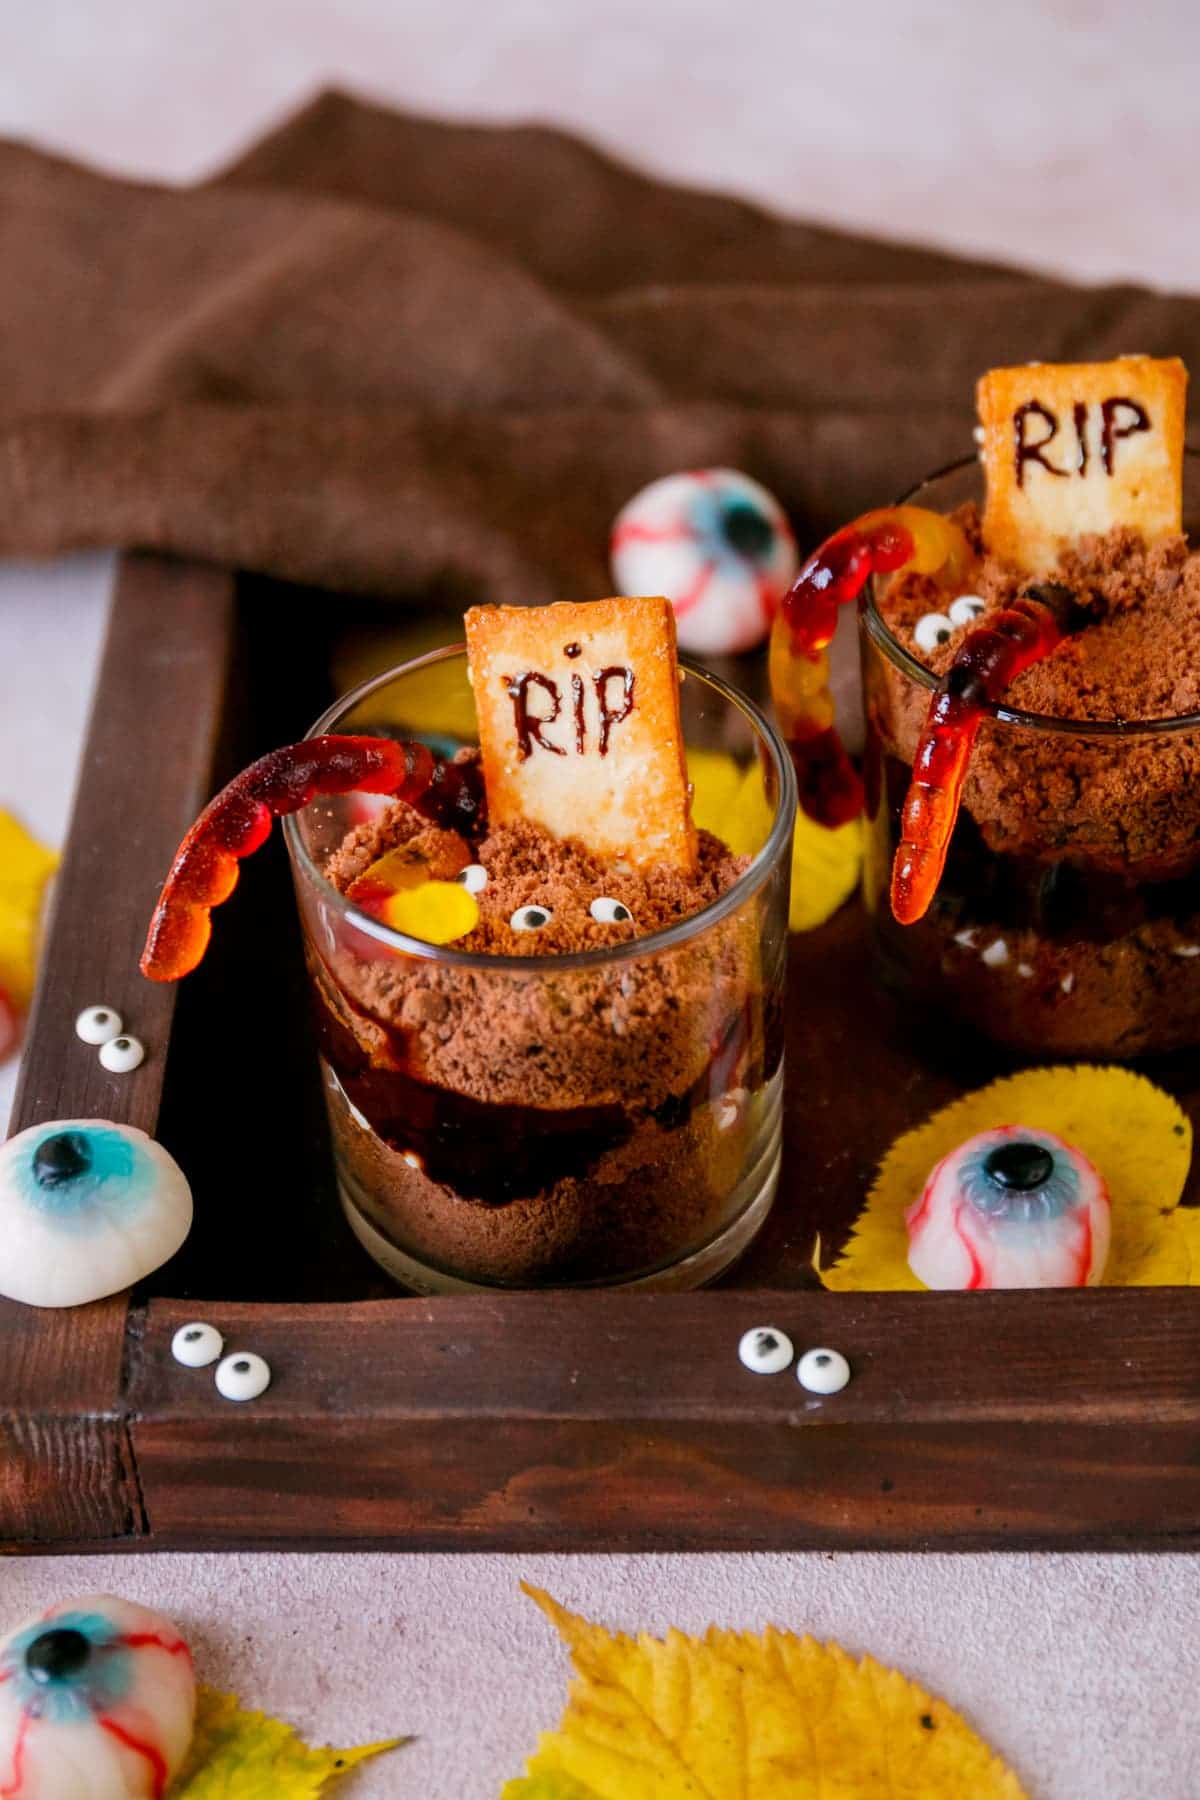 A tray of graveyard dirt cups on a wooden table decorated with edible eyeballs.